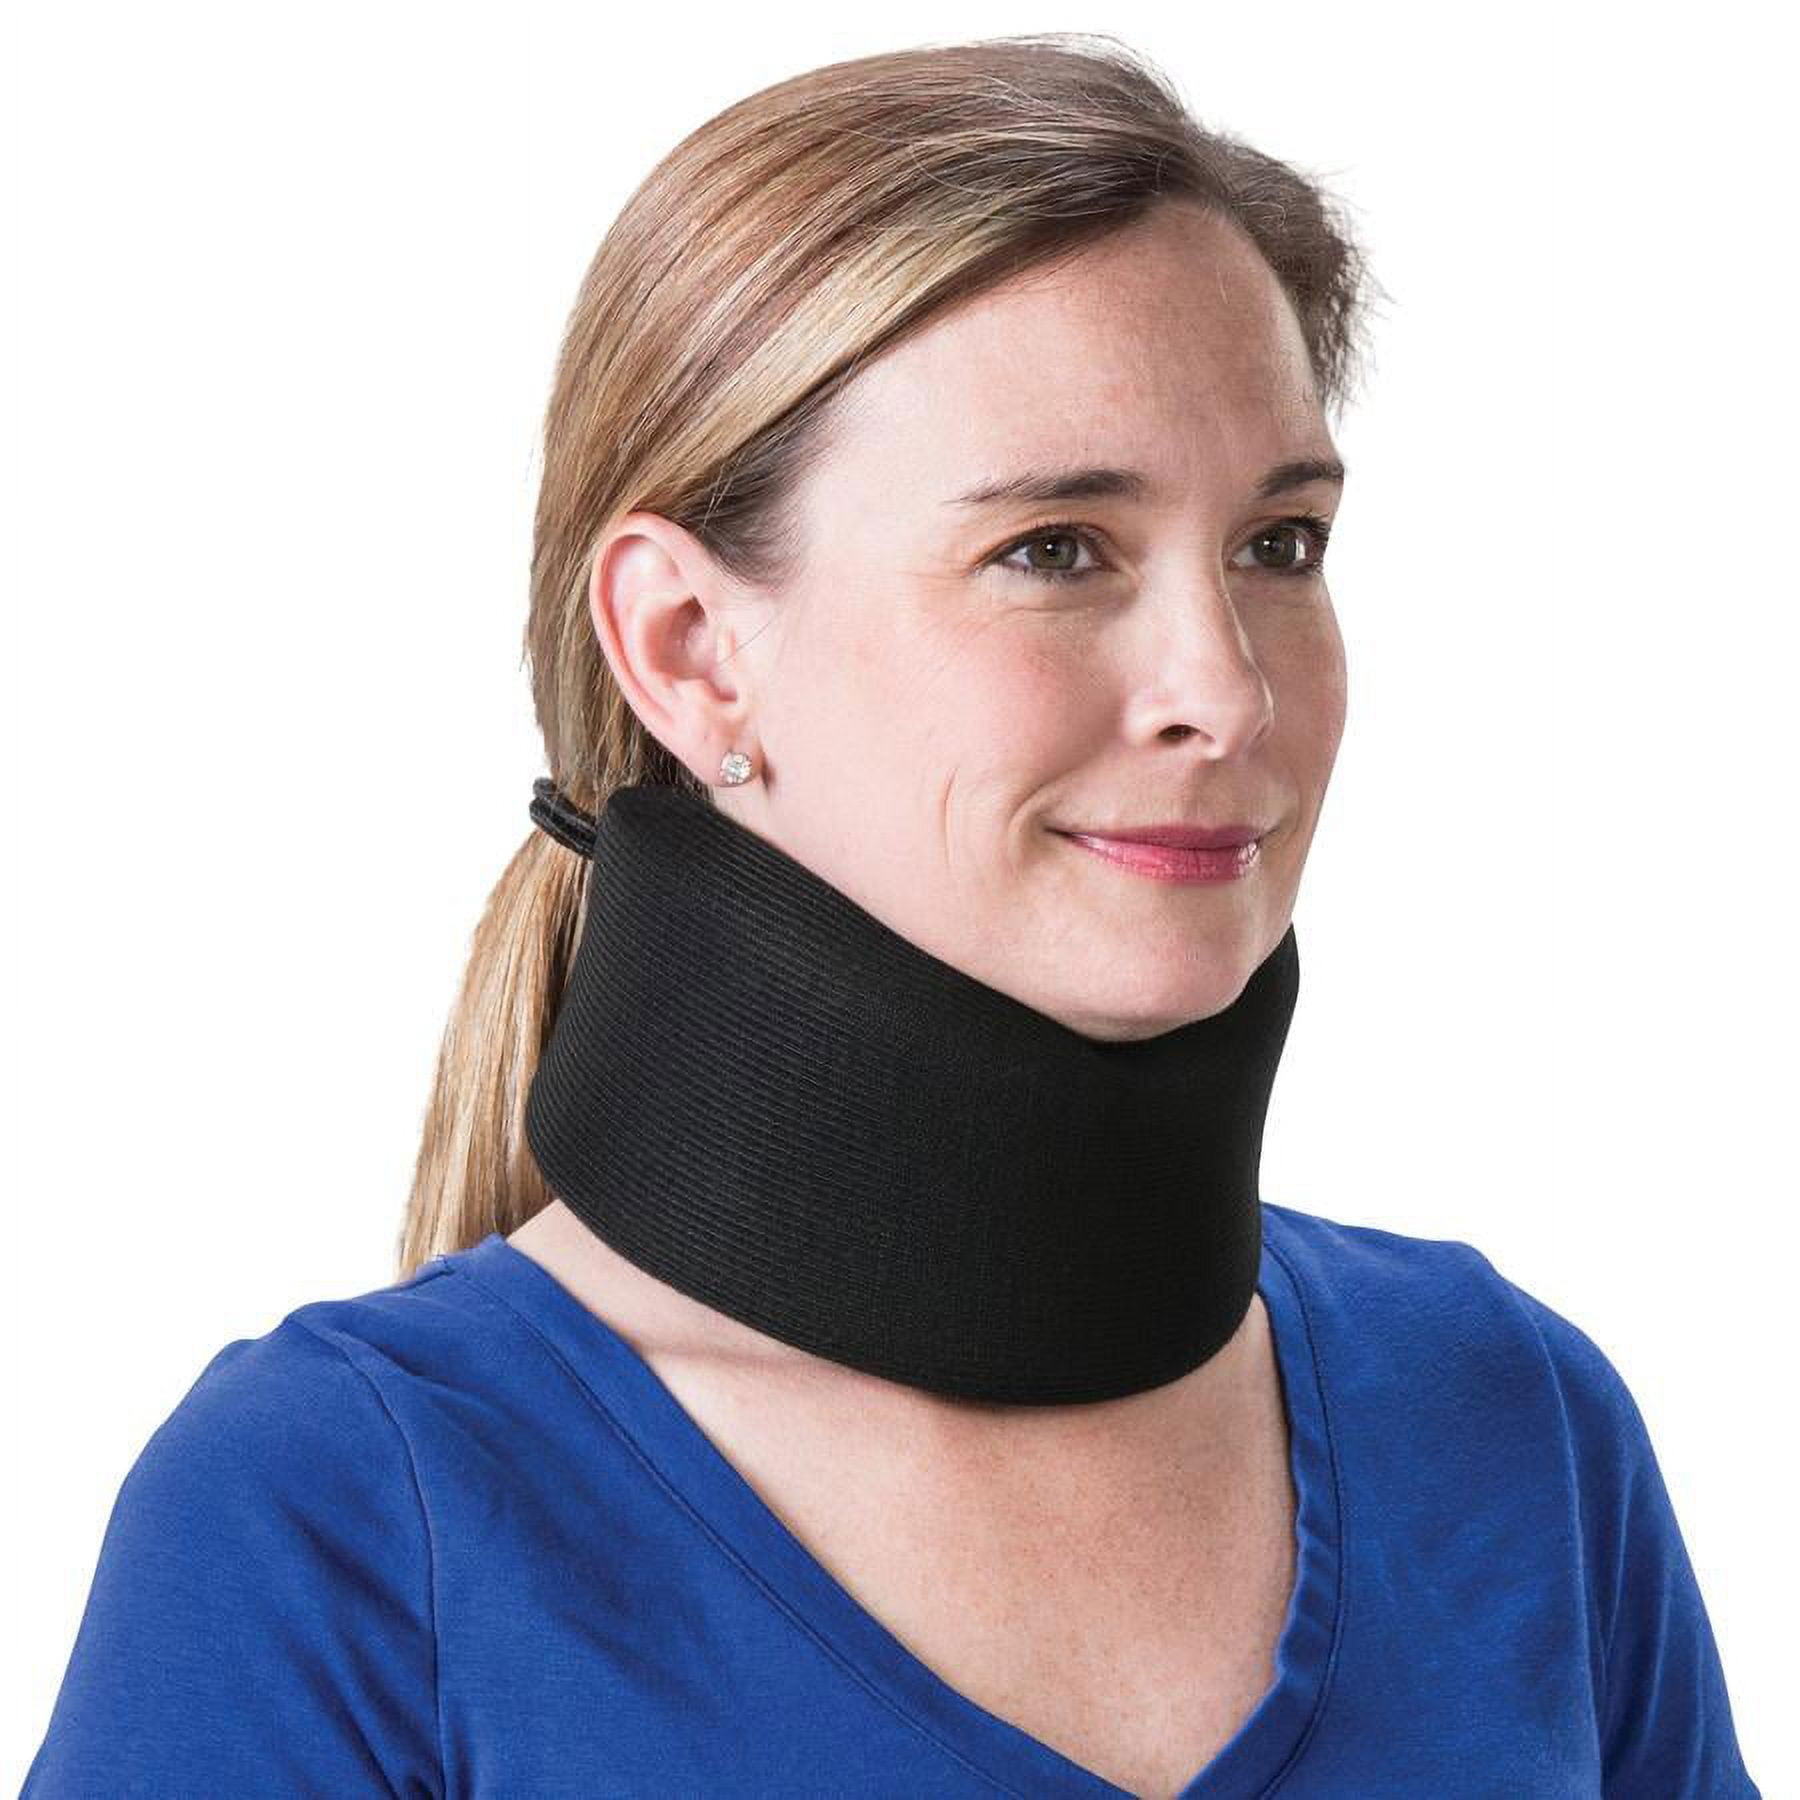  Soft Foam Neck Brace Universal Cervical Collar, Adjustable Neck  Support Brace for Sleeping - Relieves Neck Pain and Spine Pressure, Neck  Collar After Whiplash or Injury (2.5 Depth Collar, L) 